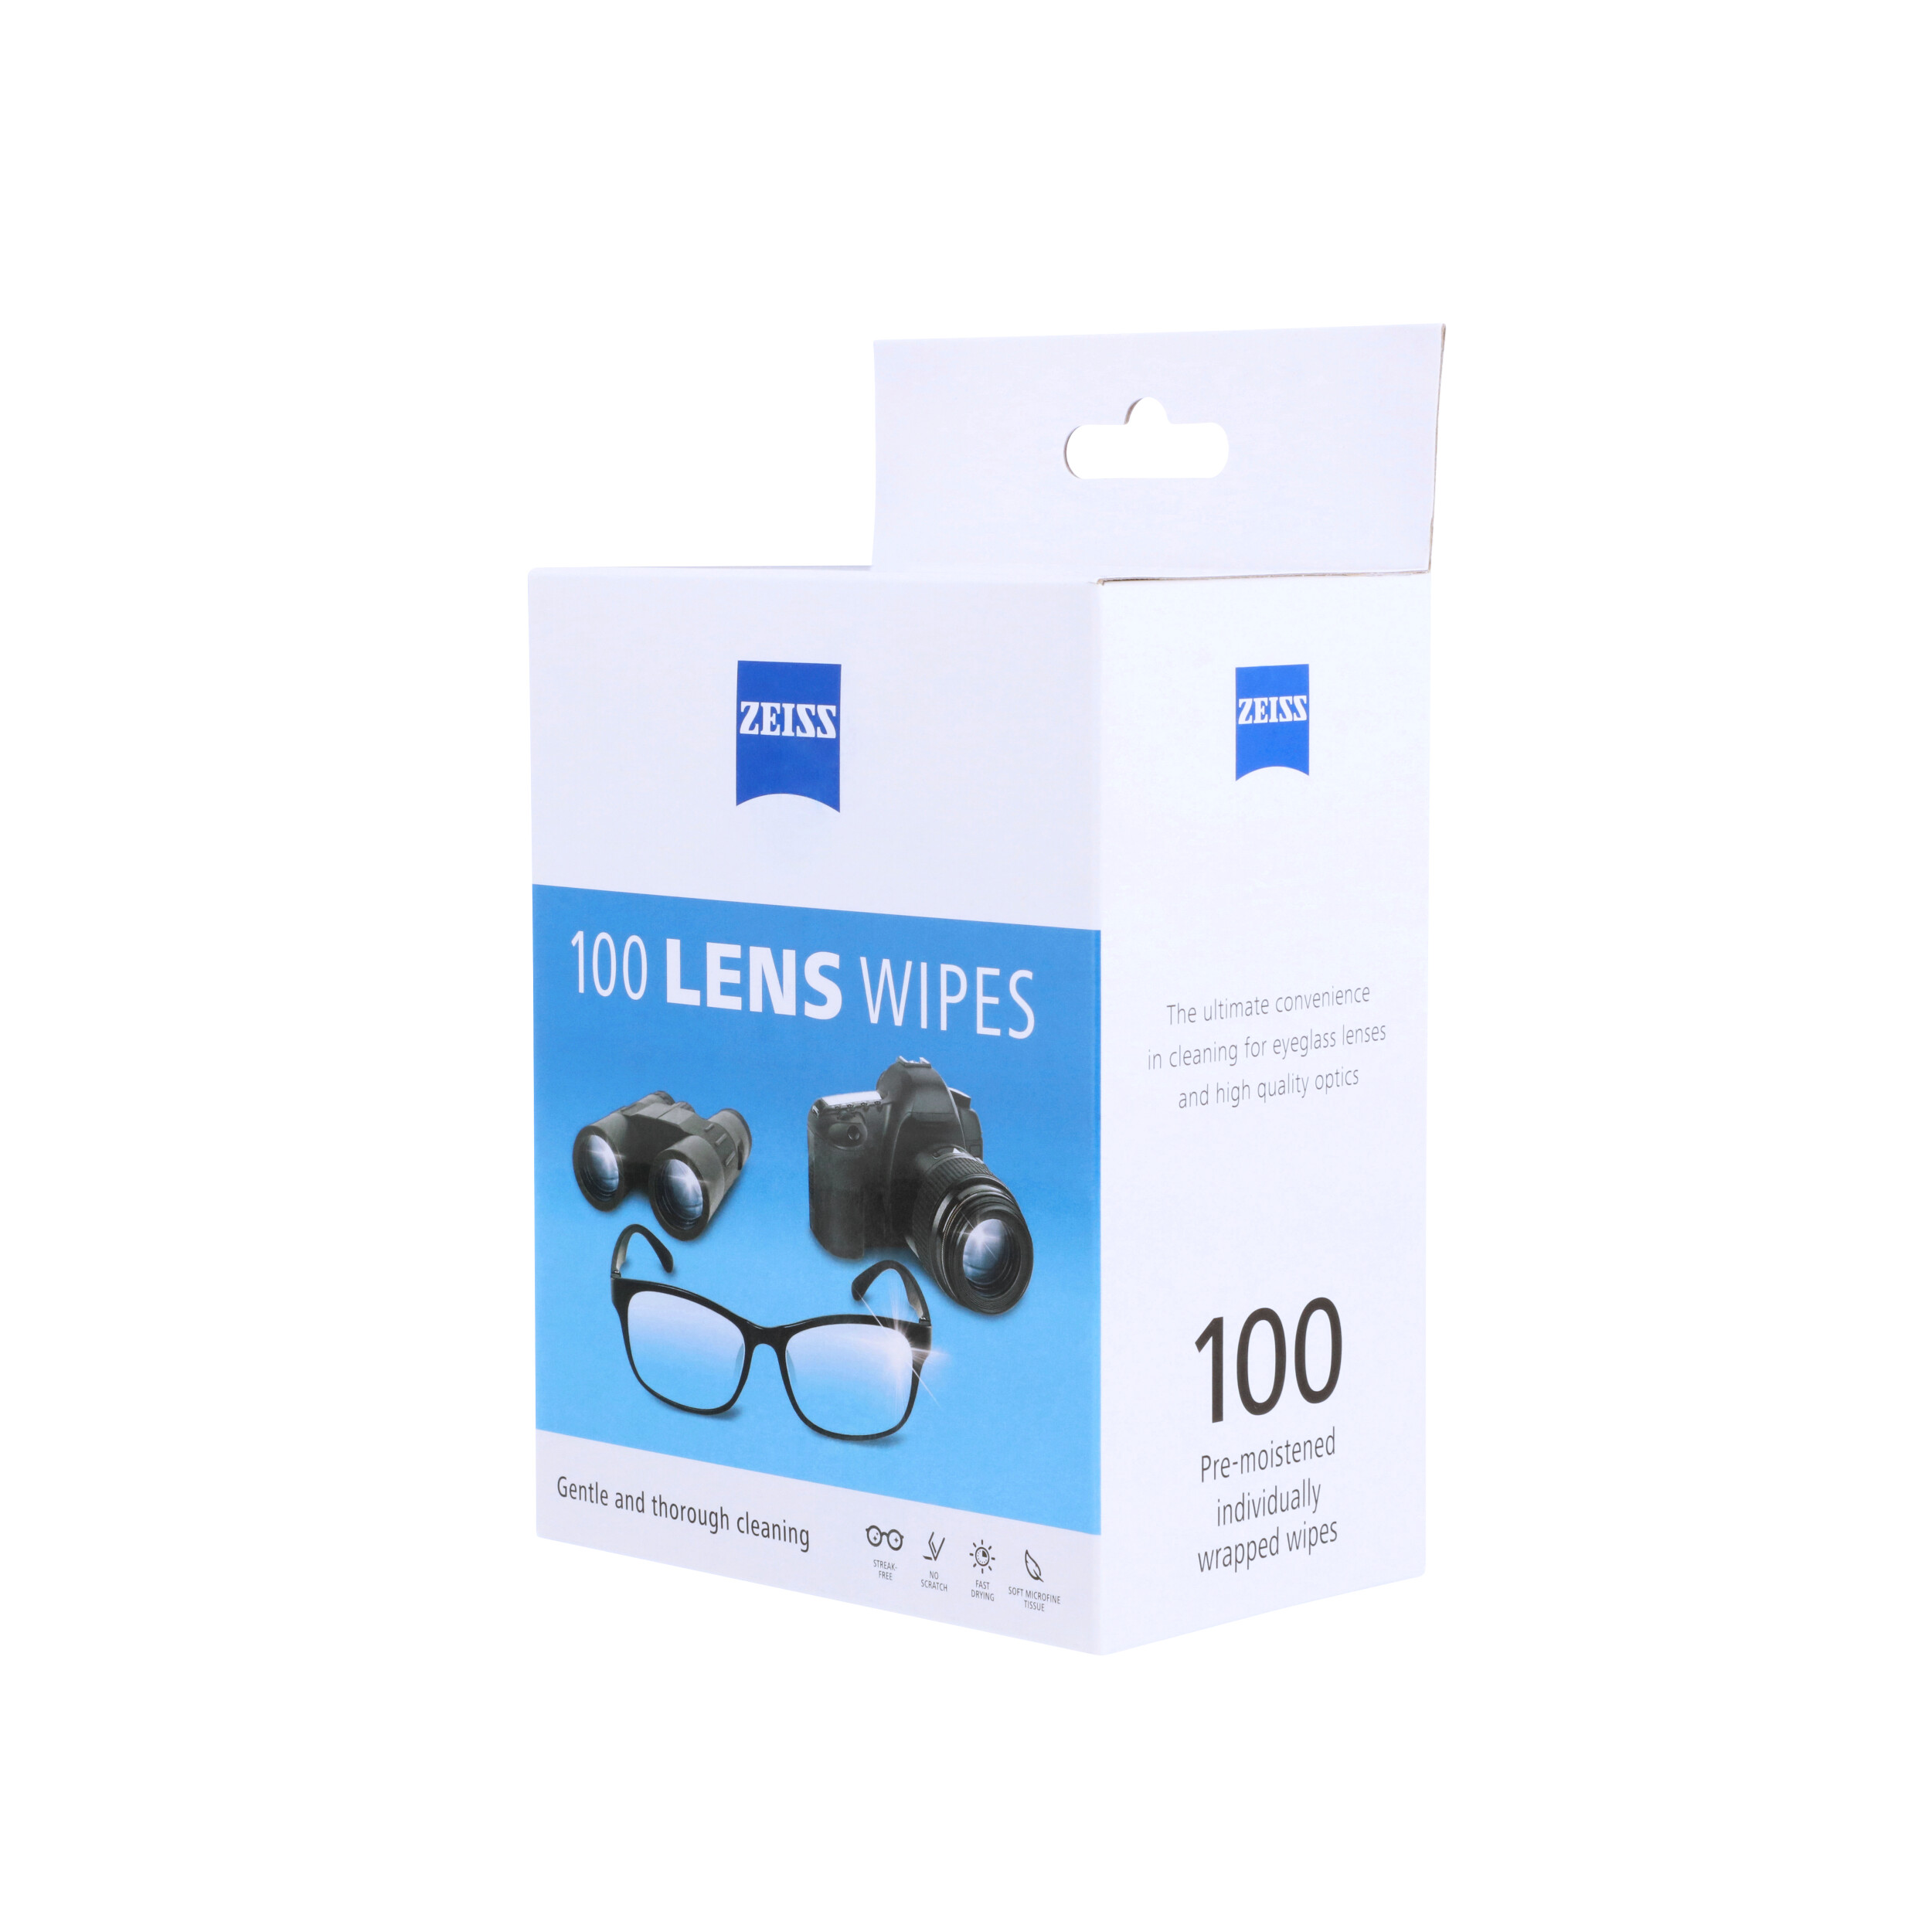 HandyClean Lens and Glass Cleaning Wipes Box of 100ct Pre-Moistened  Quick-Drying Wipes for Eyeglasses, Cameras, Cell Phone Screens,  Conveniently Fits in Purses, Pockets, or Carry-ons